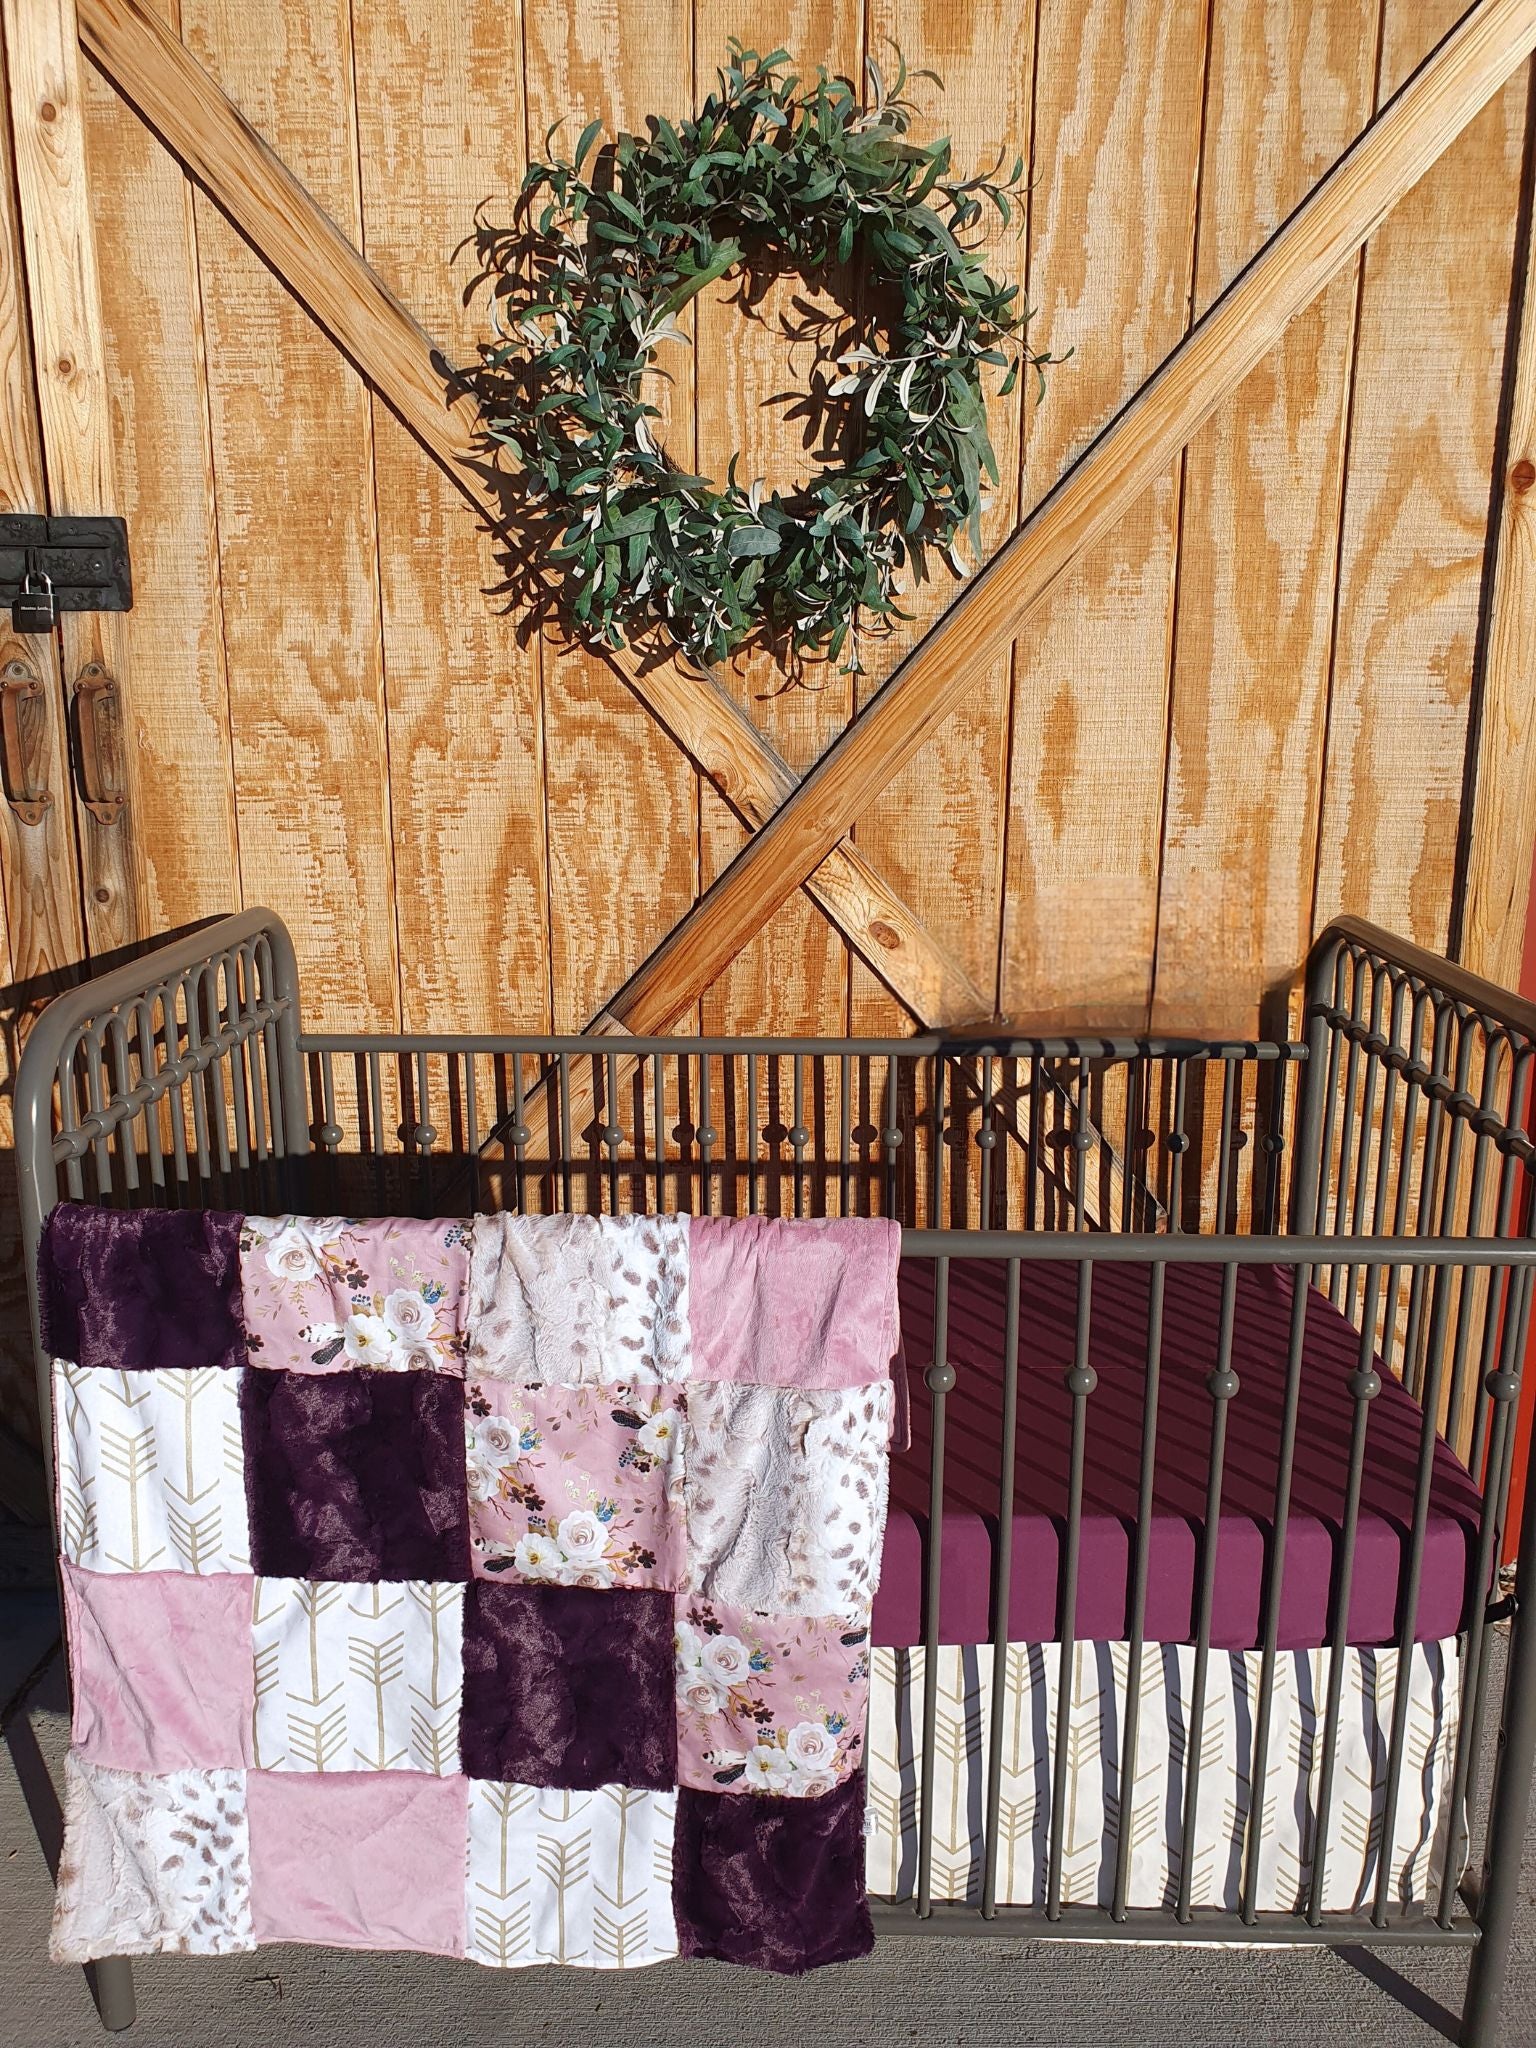 New Release Girl Crib Bedding- Dusty Rose Boho Floral and Gold Arrow Baby Bedding Collection - DBC Baby Bedding Co 